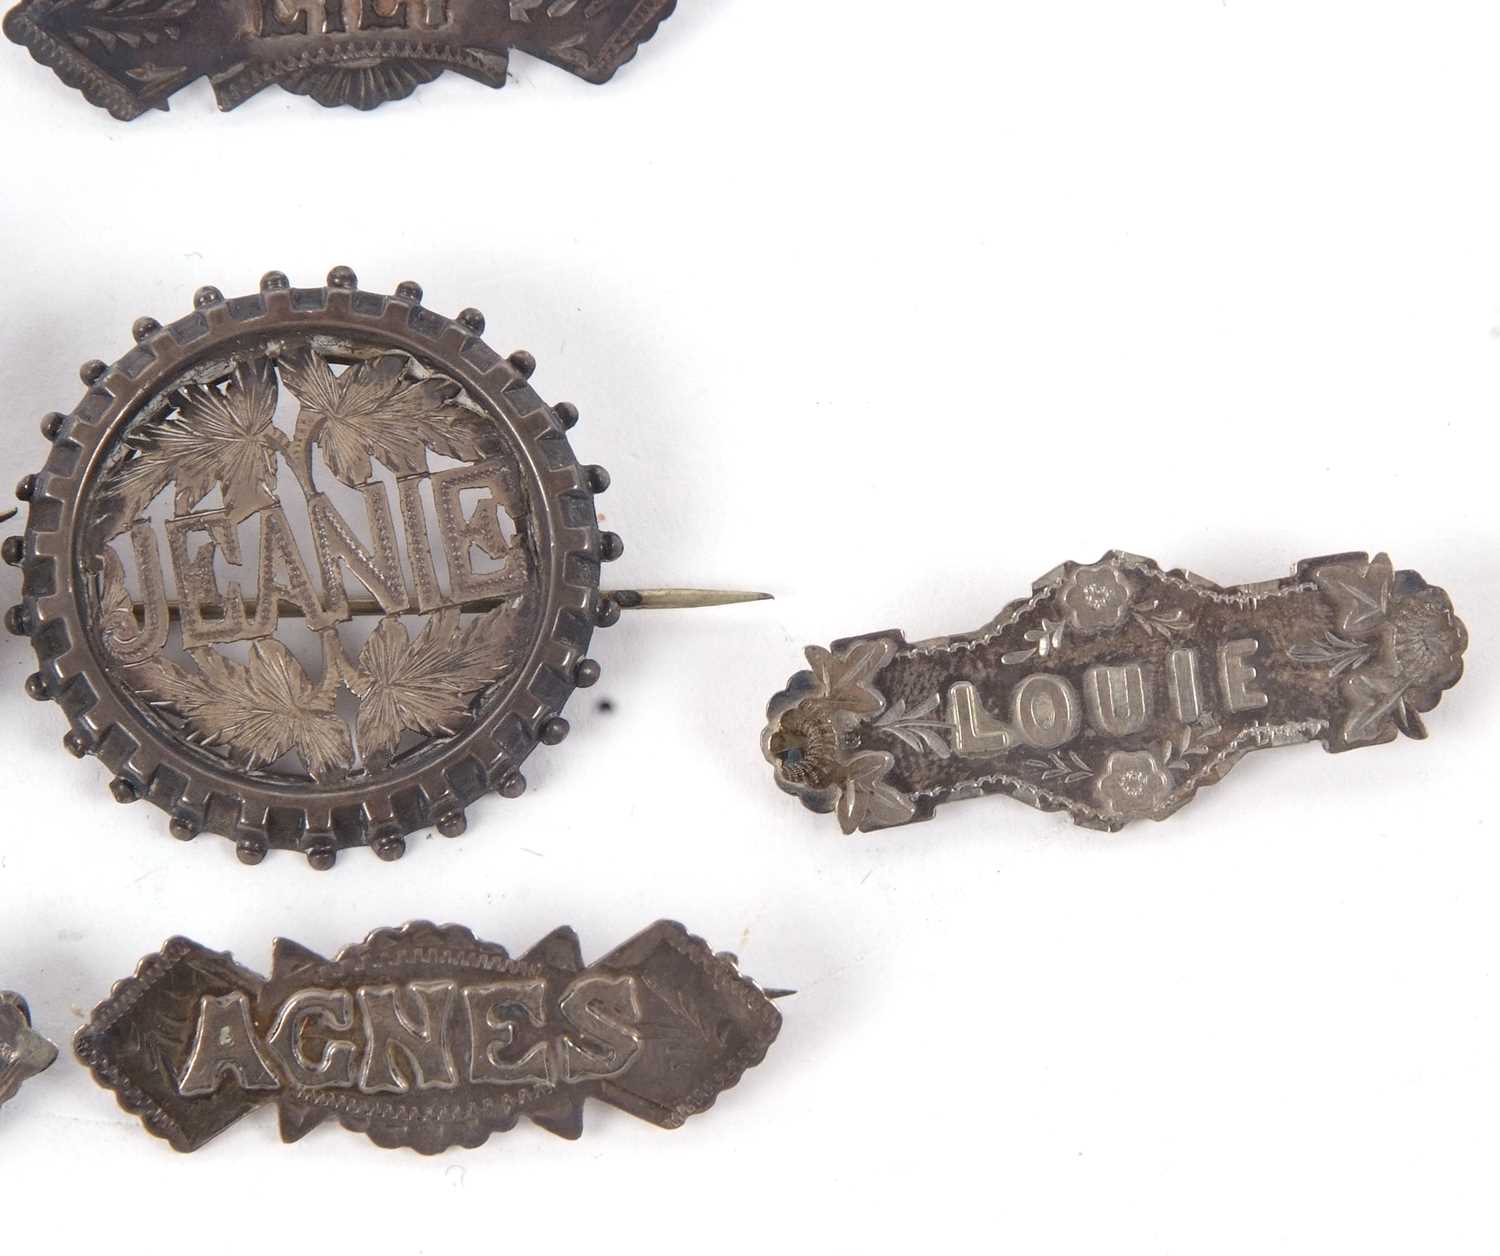 Eight early 20th century silver and white metal name brooches, to include Jeanie, Maude, Louie, - Image 6 of 6